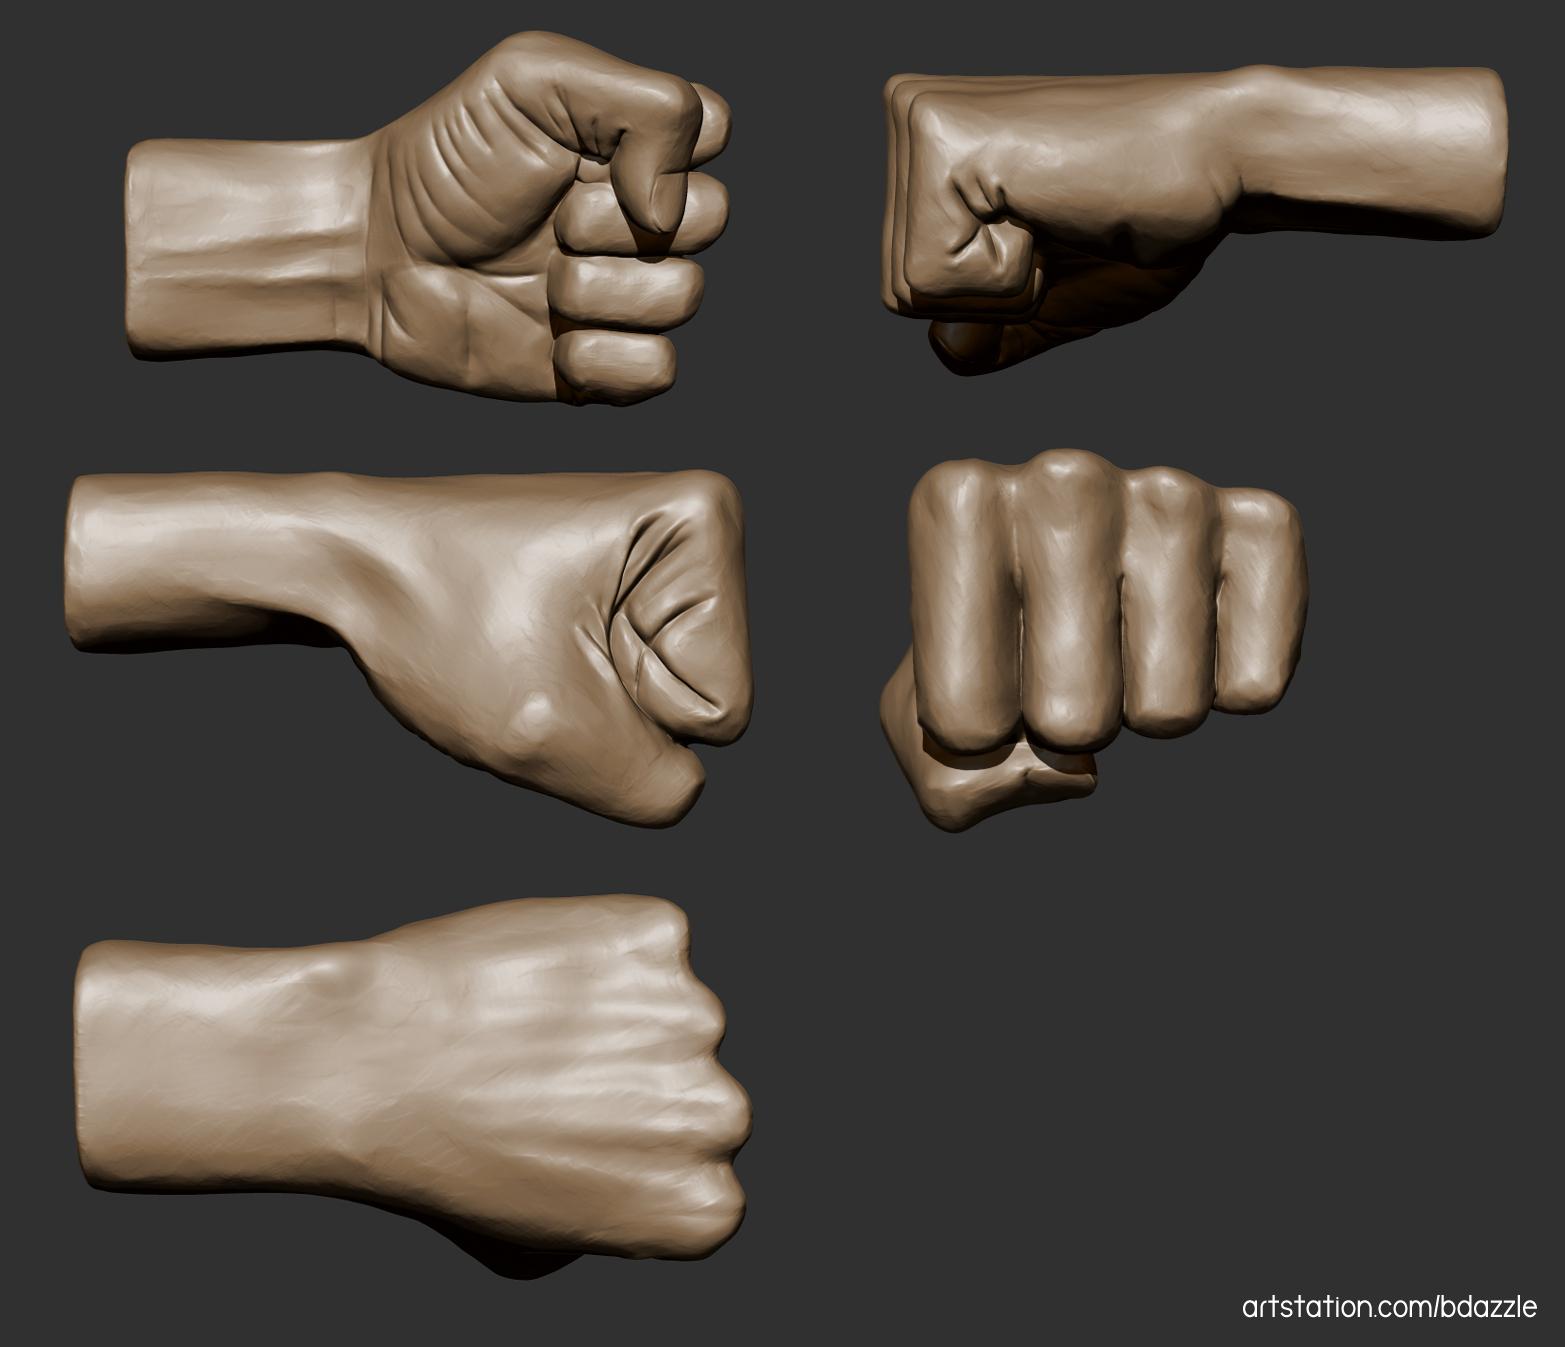 3D sculpted clenched fist from multiple points of view by Britney Luong